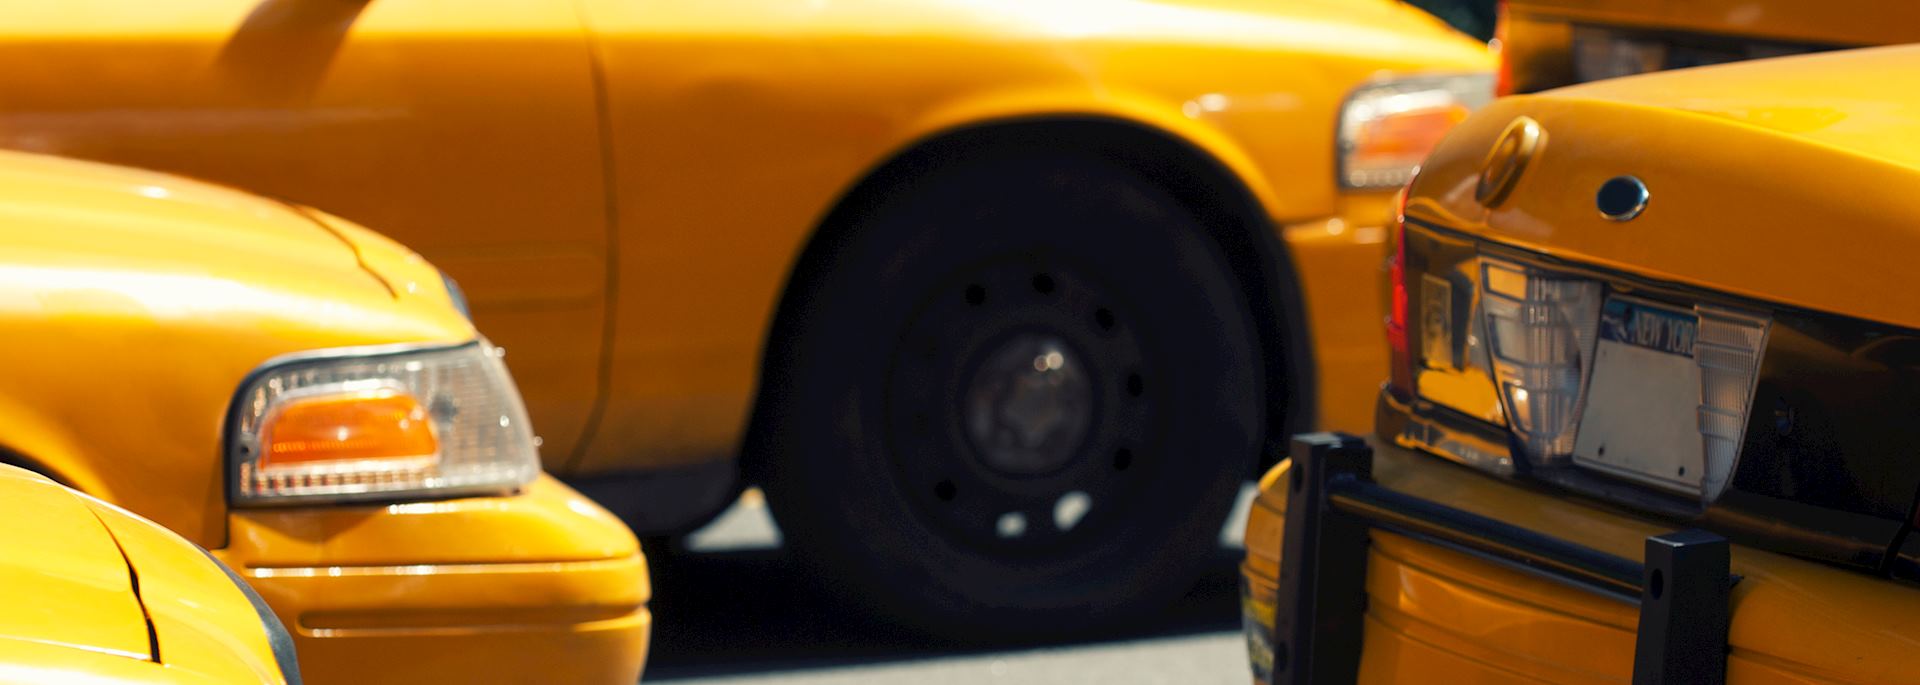 Yellow taxis, New York